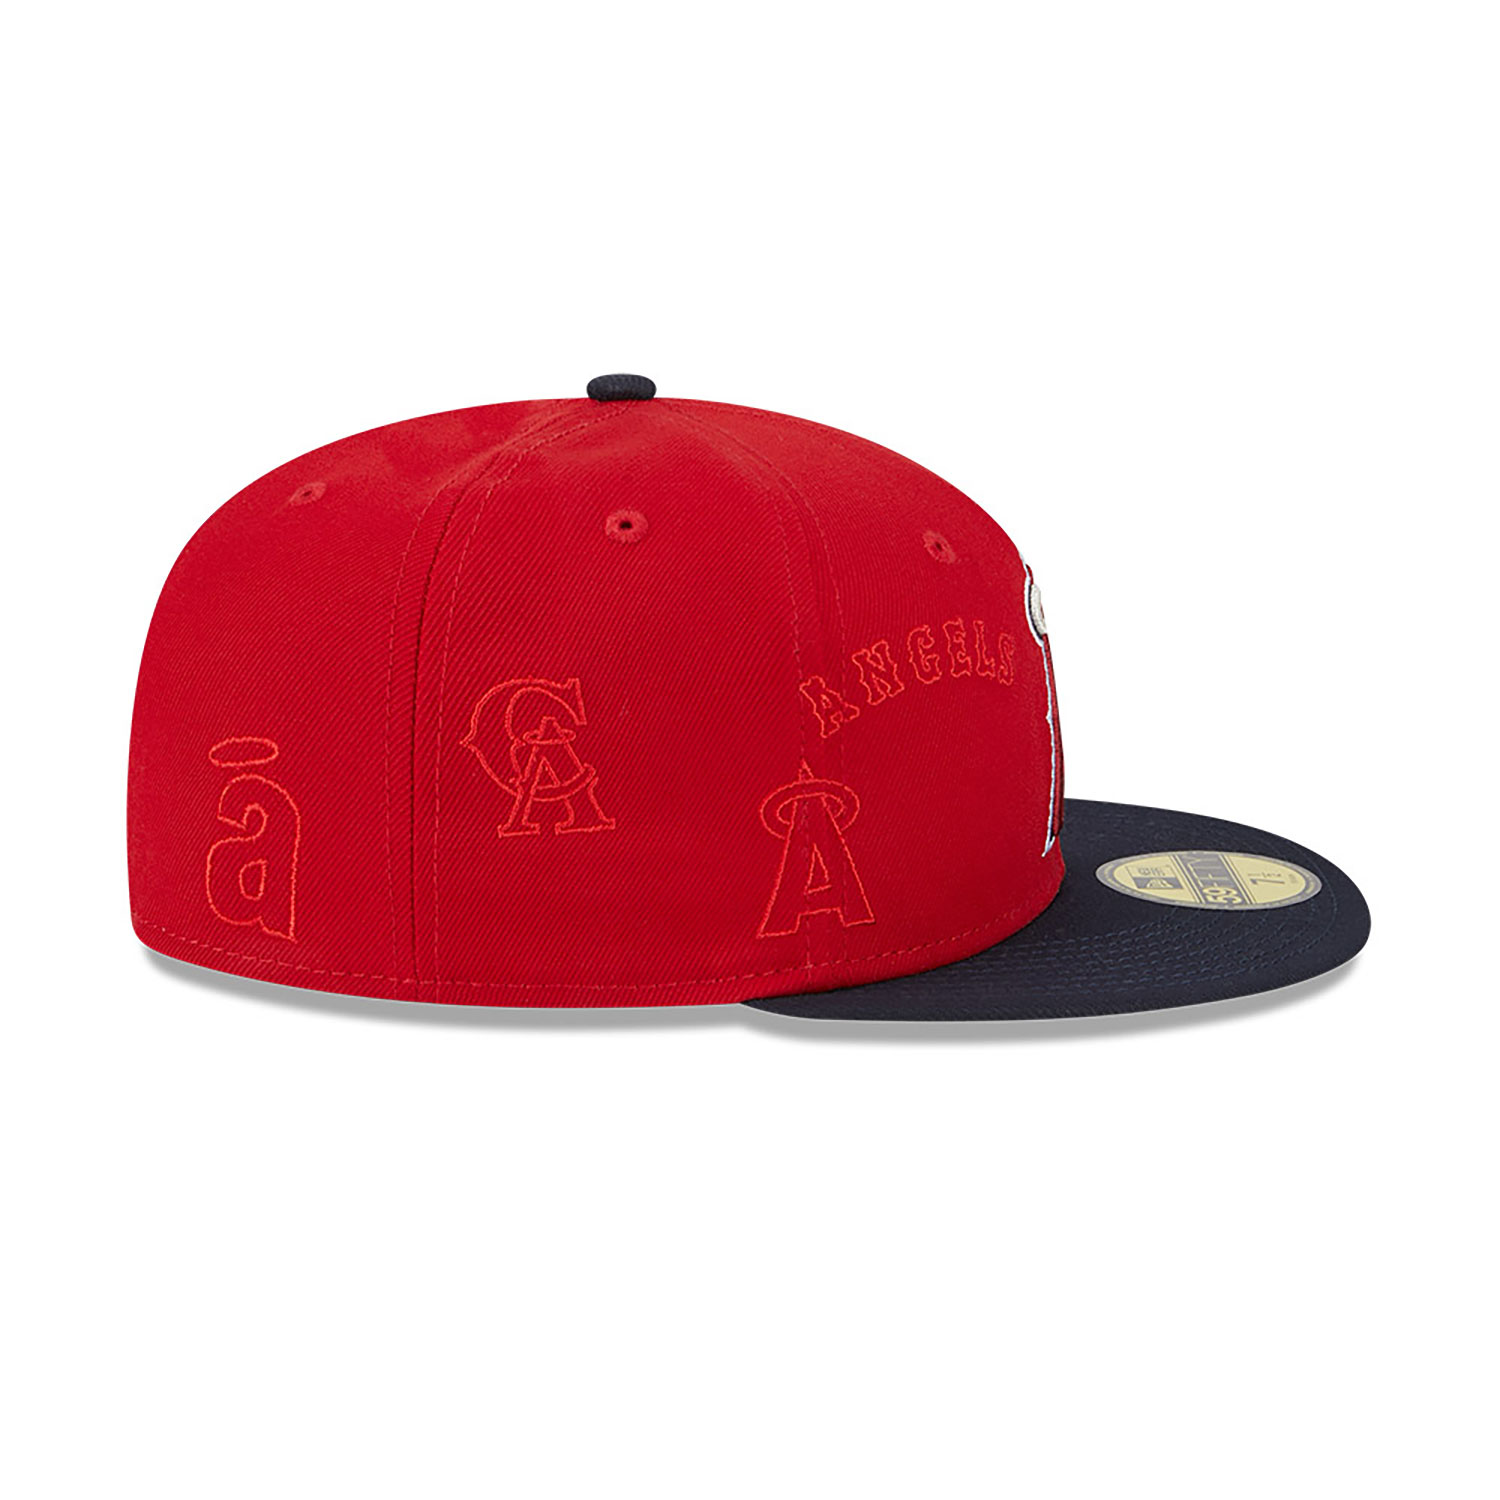 Anaheim Angels Multi Logo Navy 59FIFTY Fitted Cap